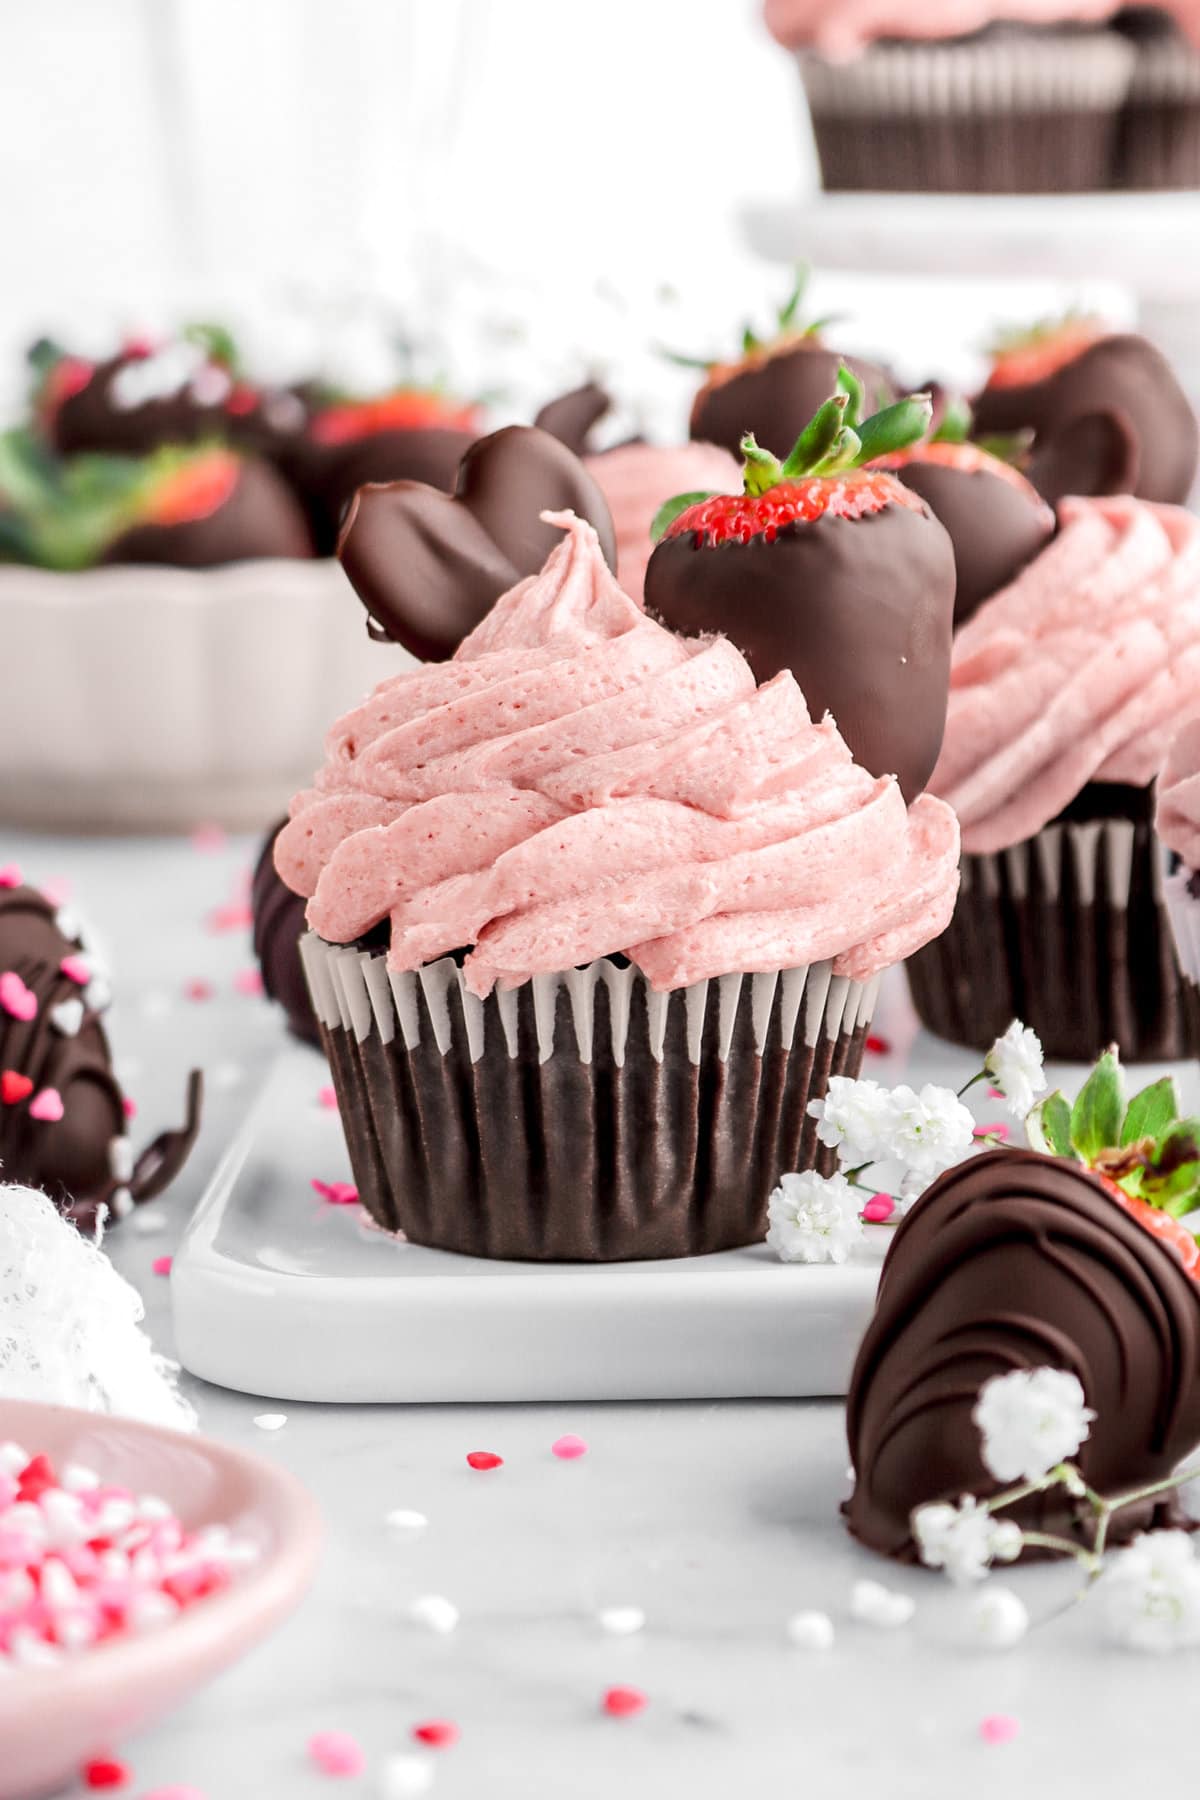 chocolate cupcake with strawberry frosting on white tray with more cupcakes behind and bowl of chocolate dipped strawberries.